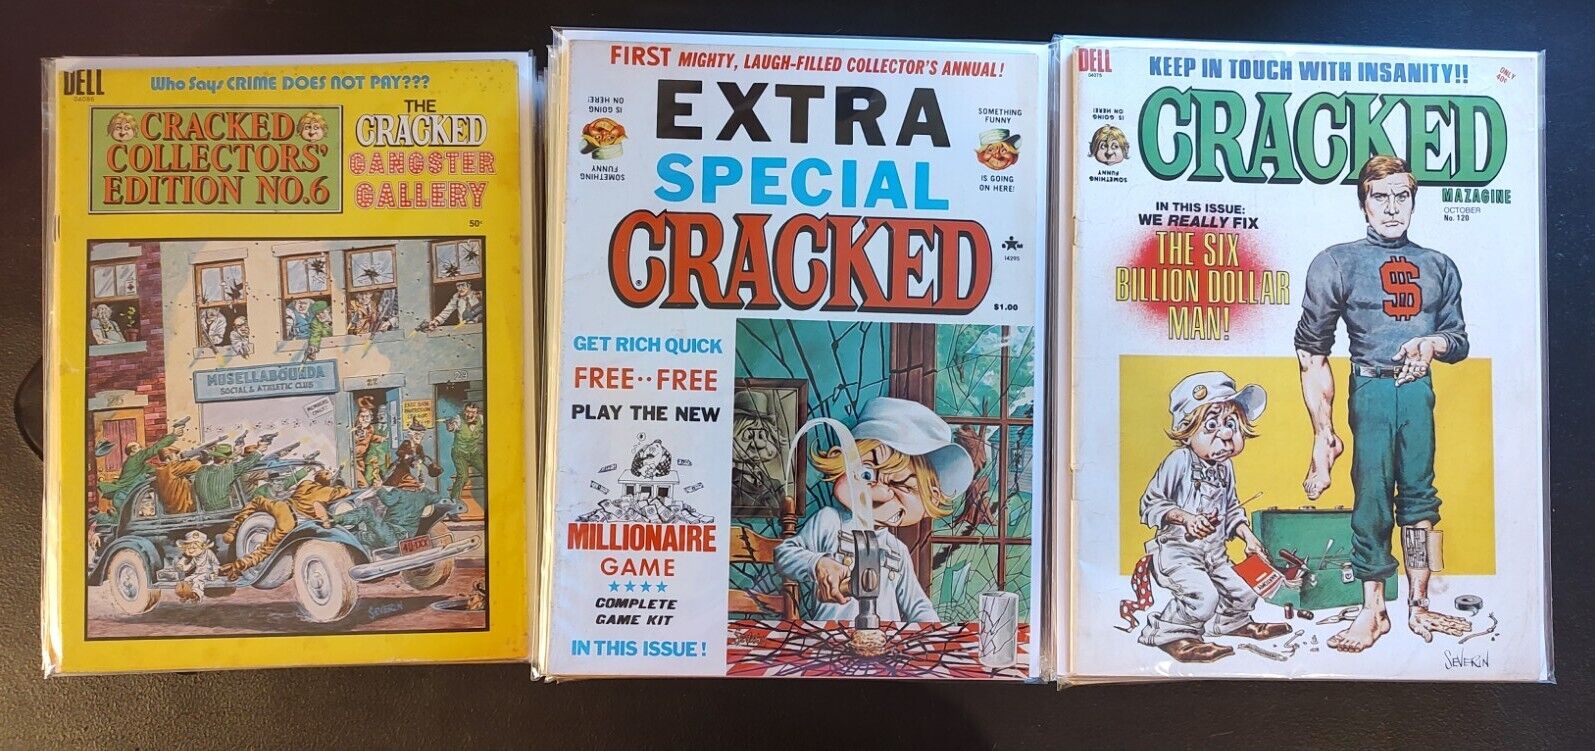 Cracked Magazine 43 issue lot 120-152, Collectors, Giant, Annuals and more